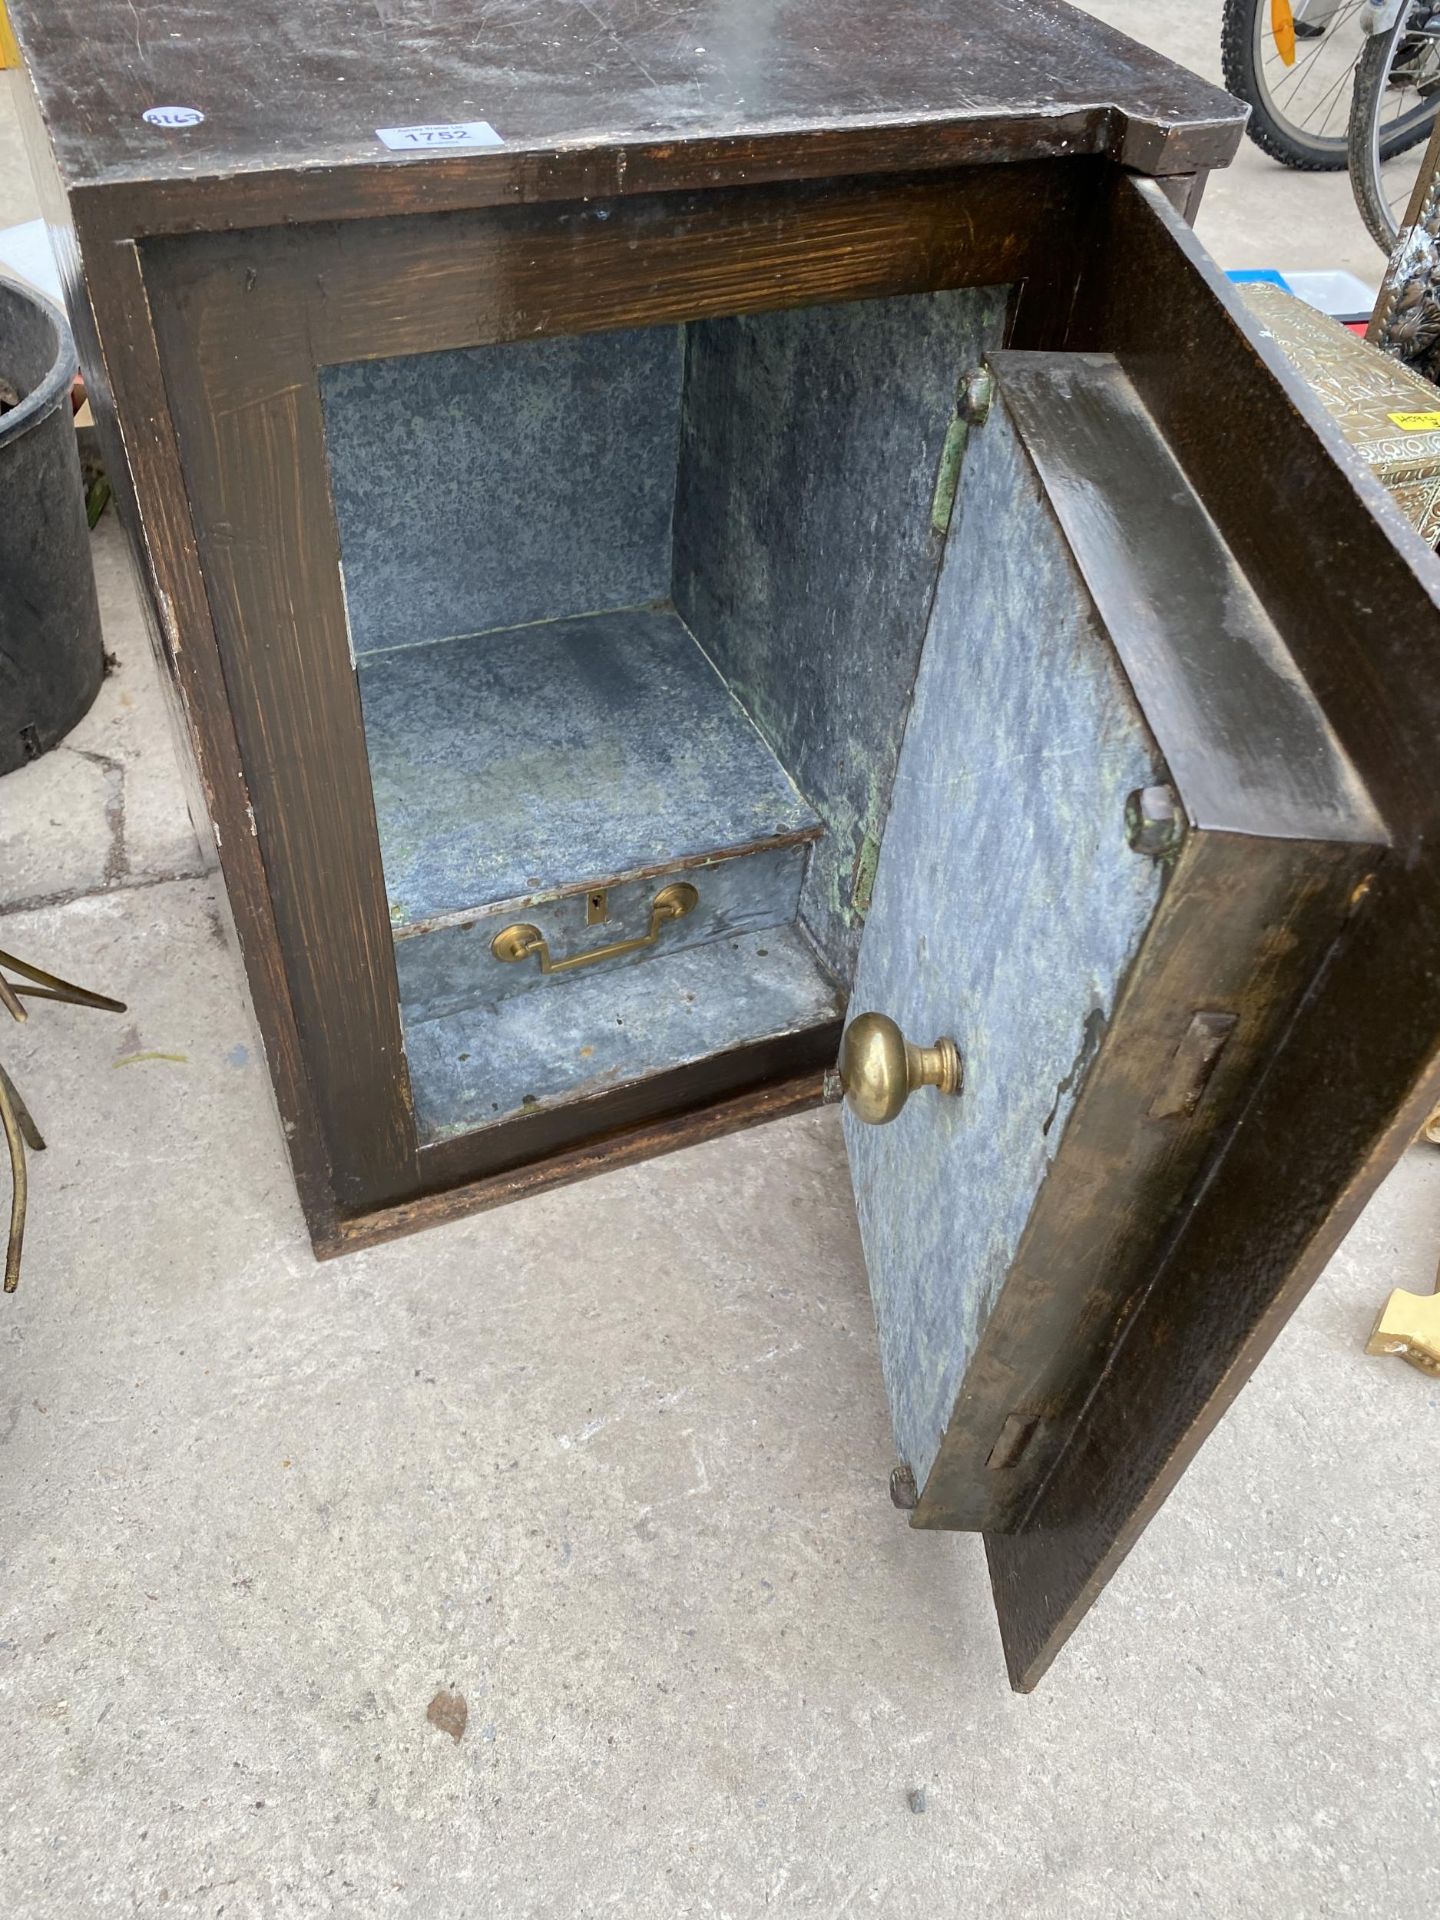 A VINTAGE HEAVY CAST IRON FIRE SAFE WITH BRASS FITTINGS (UNLOCKED BUT NO KEY PRESENT) - Image 3 of 3